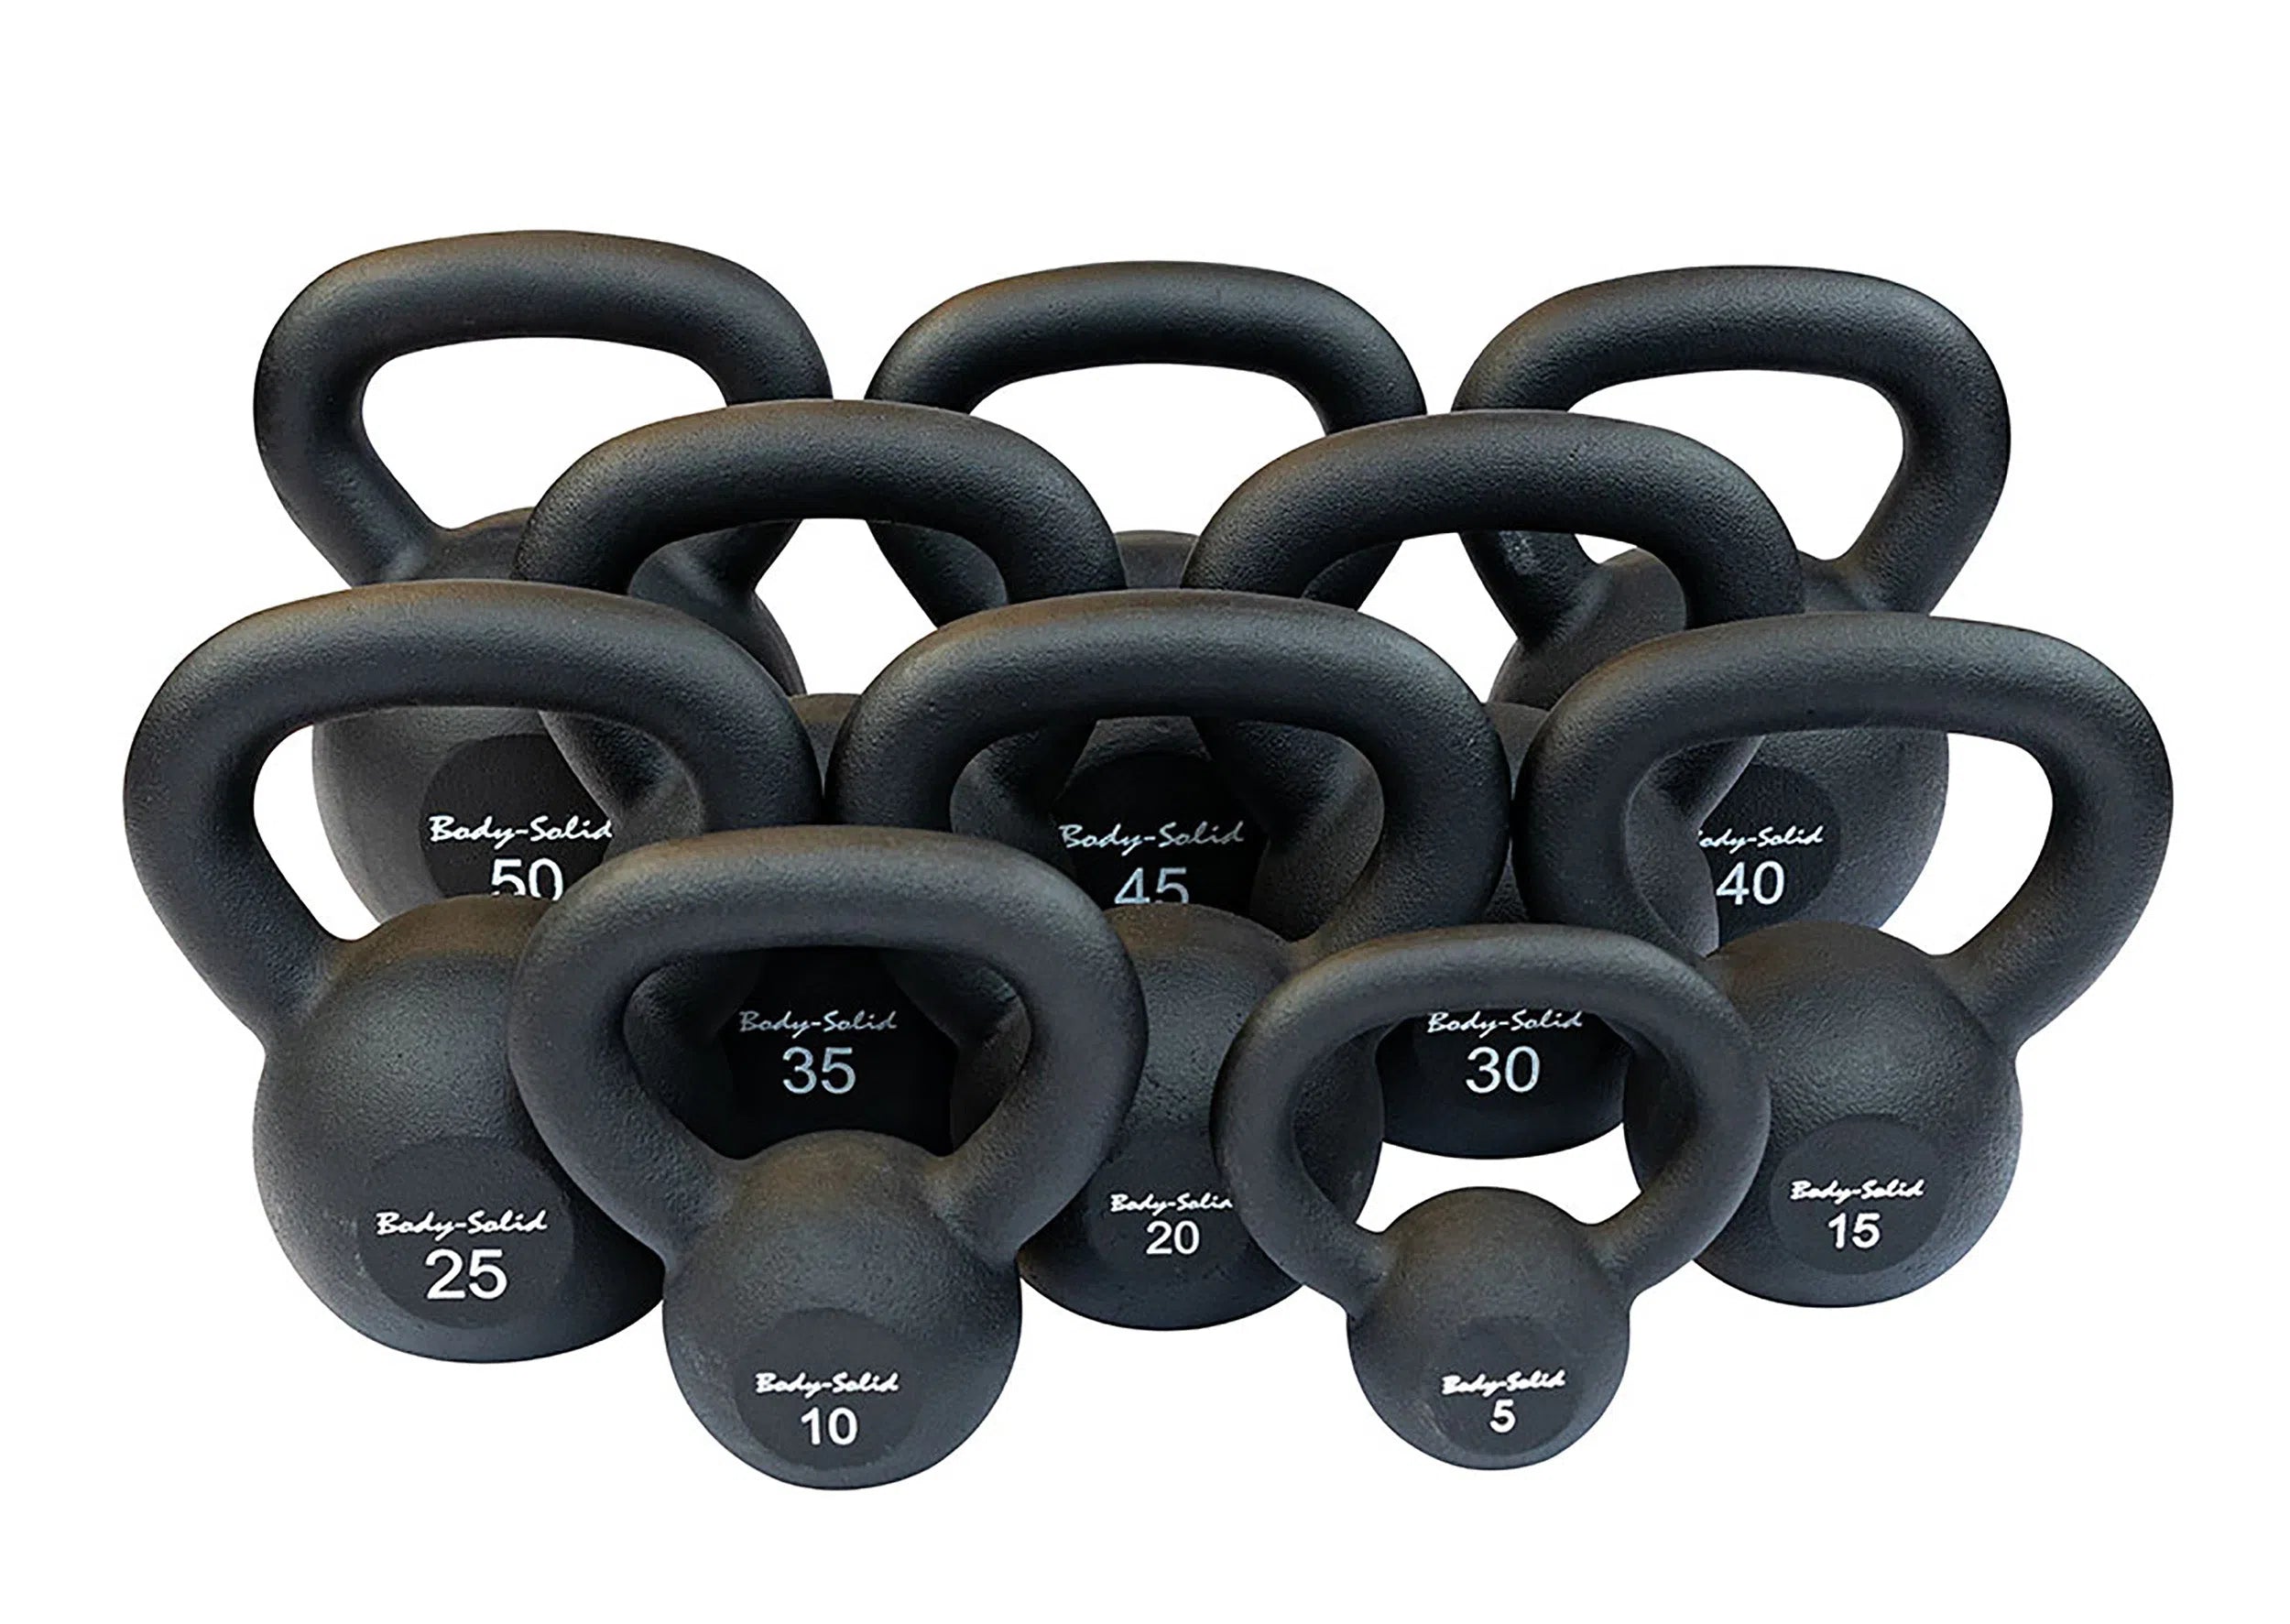 ESCAPE FITNESS SBX KETTLEBELL SET WITH RIGID RACK - Gym Equipment